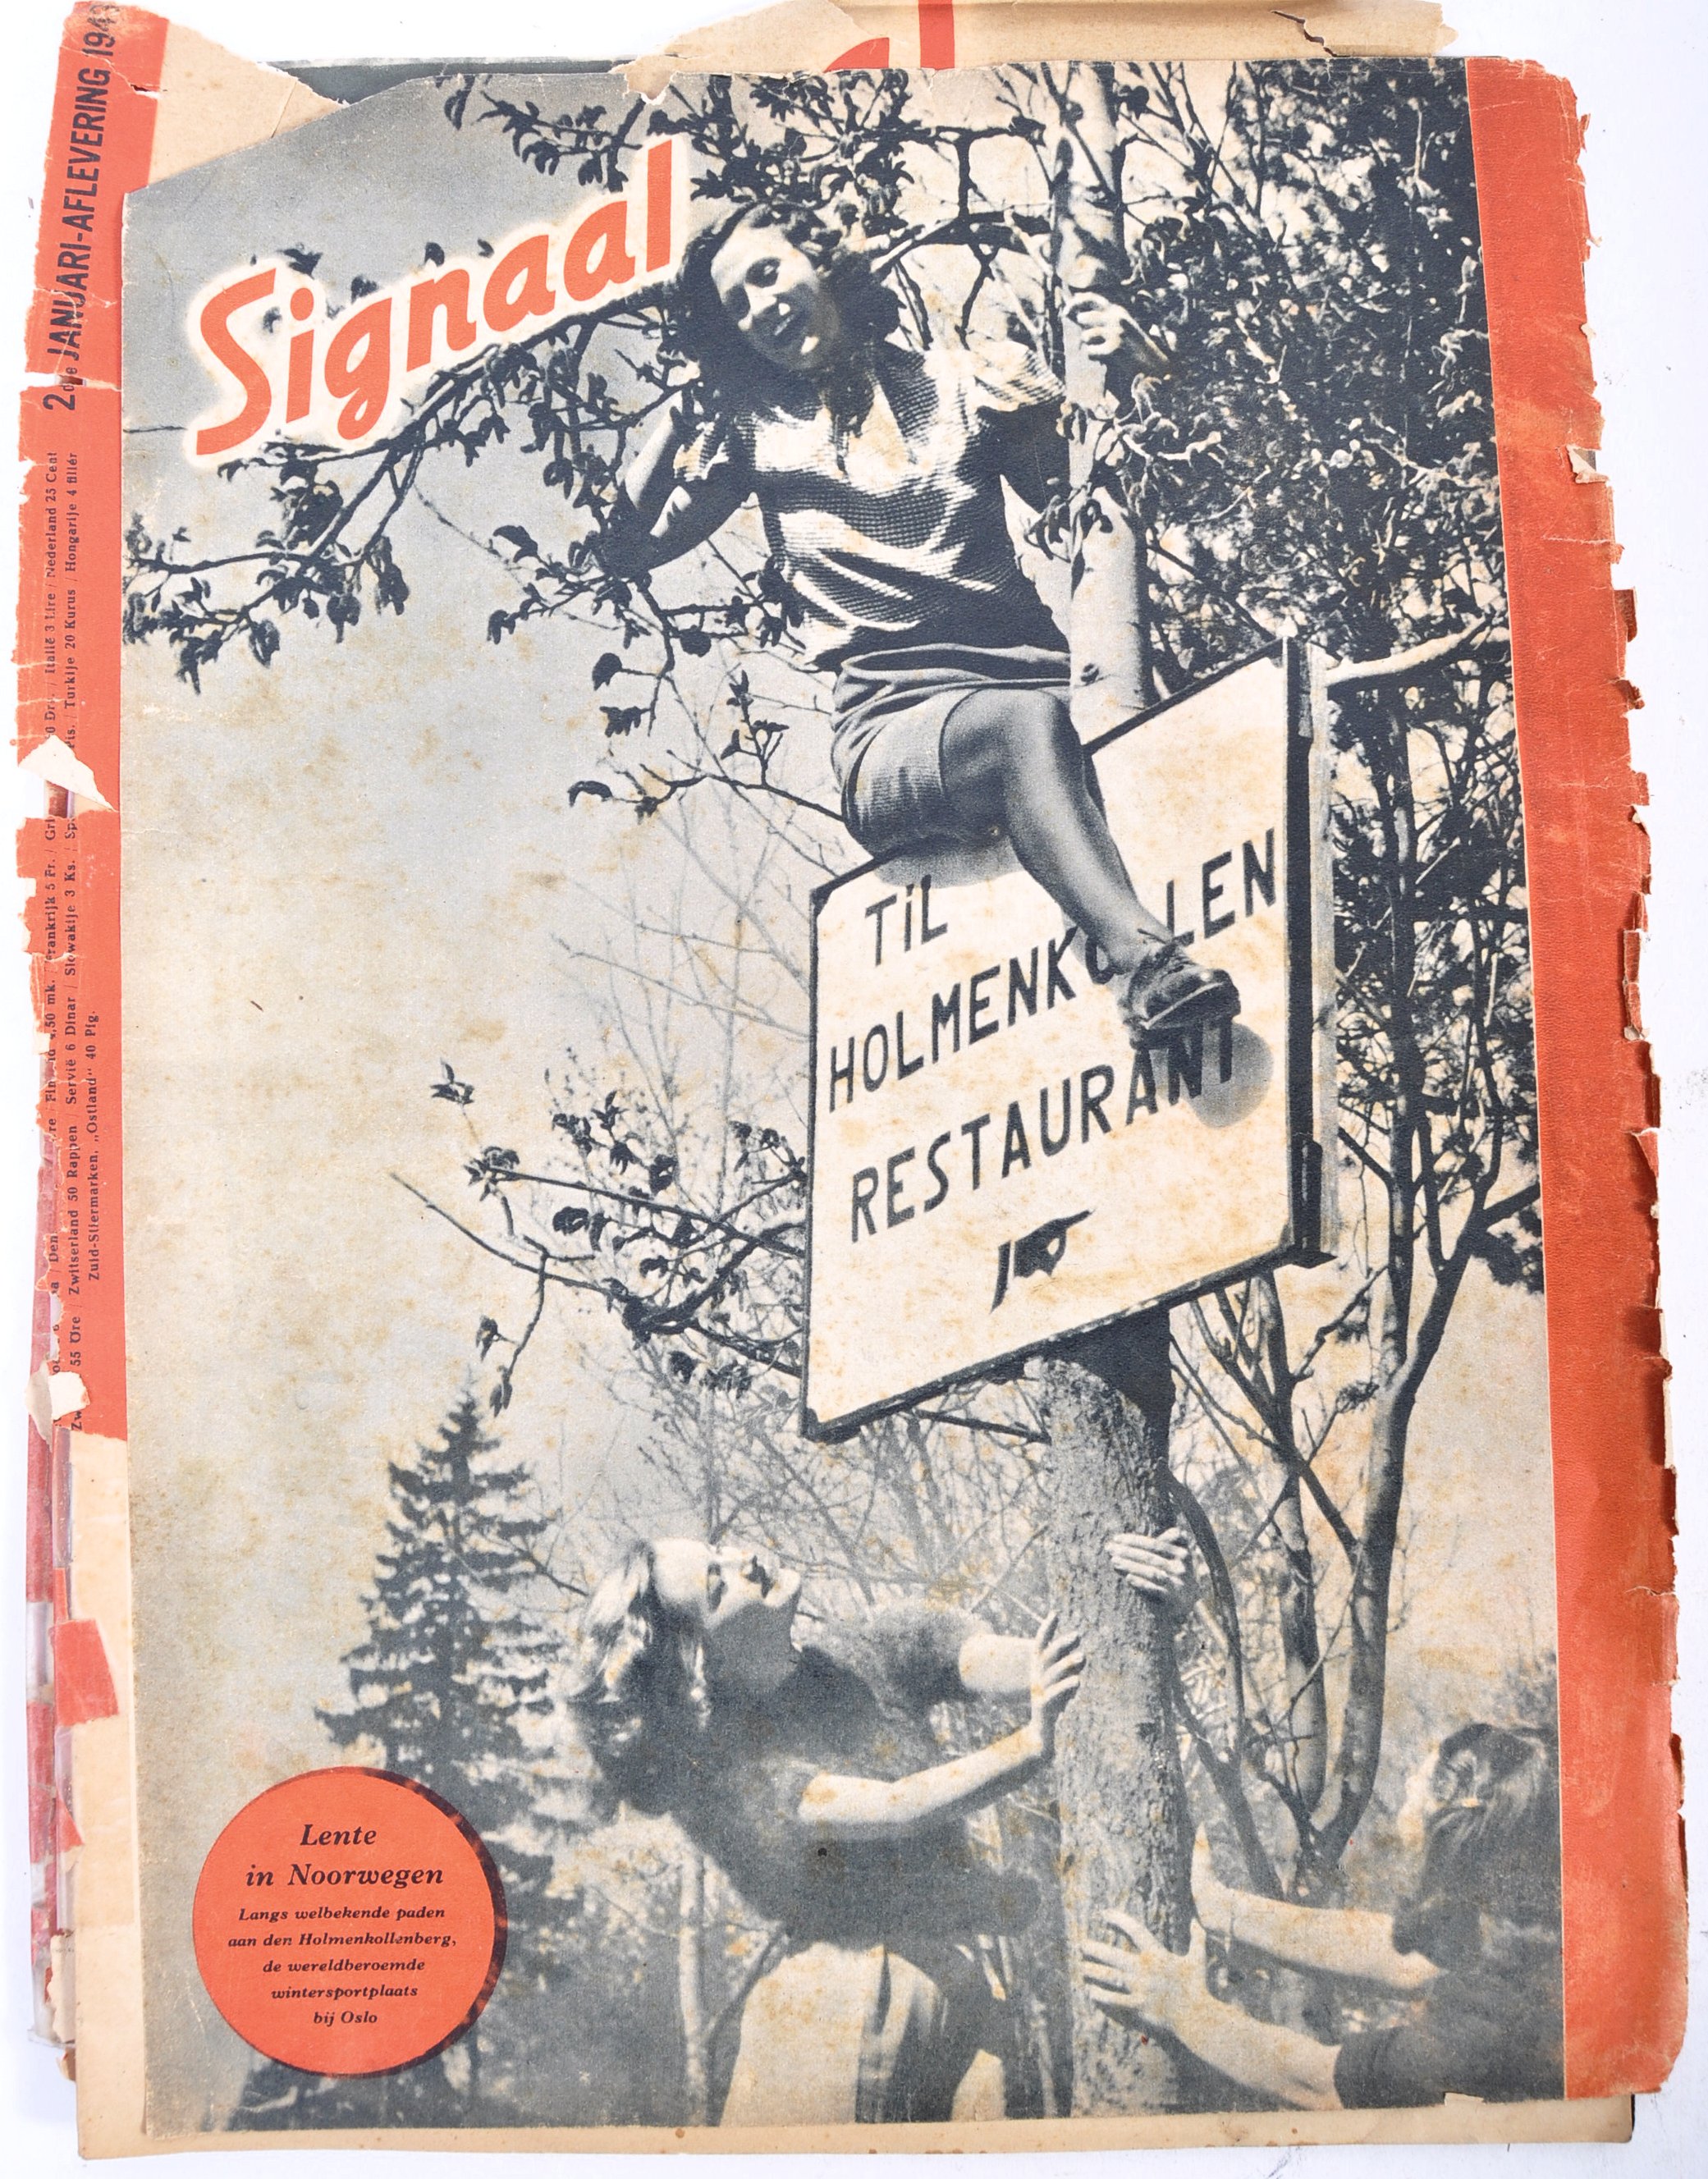 COLLECTION OF WWII DUTCH ' SIGNAAL ' MAGAZINES - Image 6 of 6